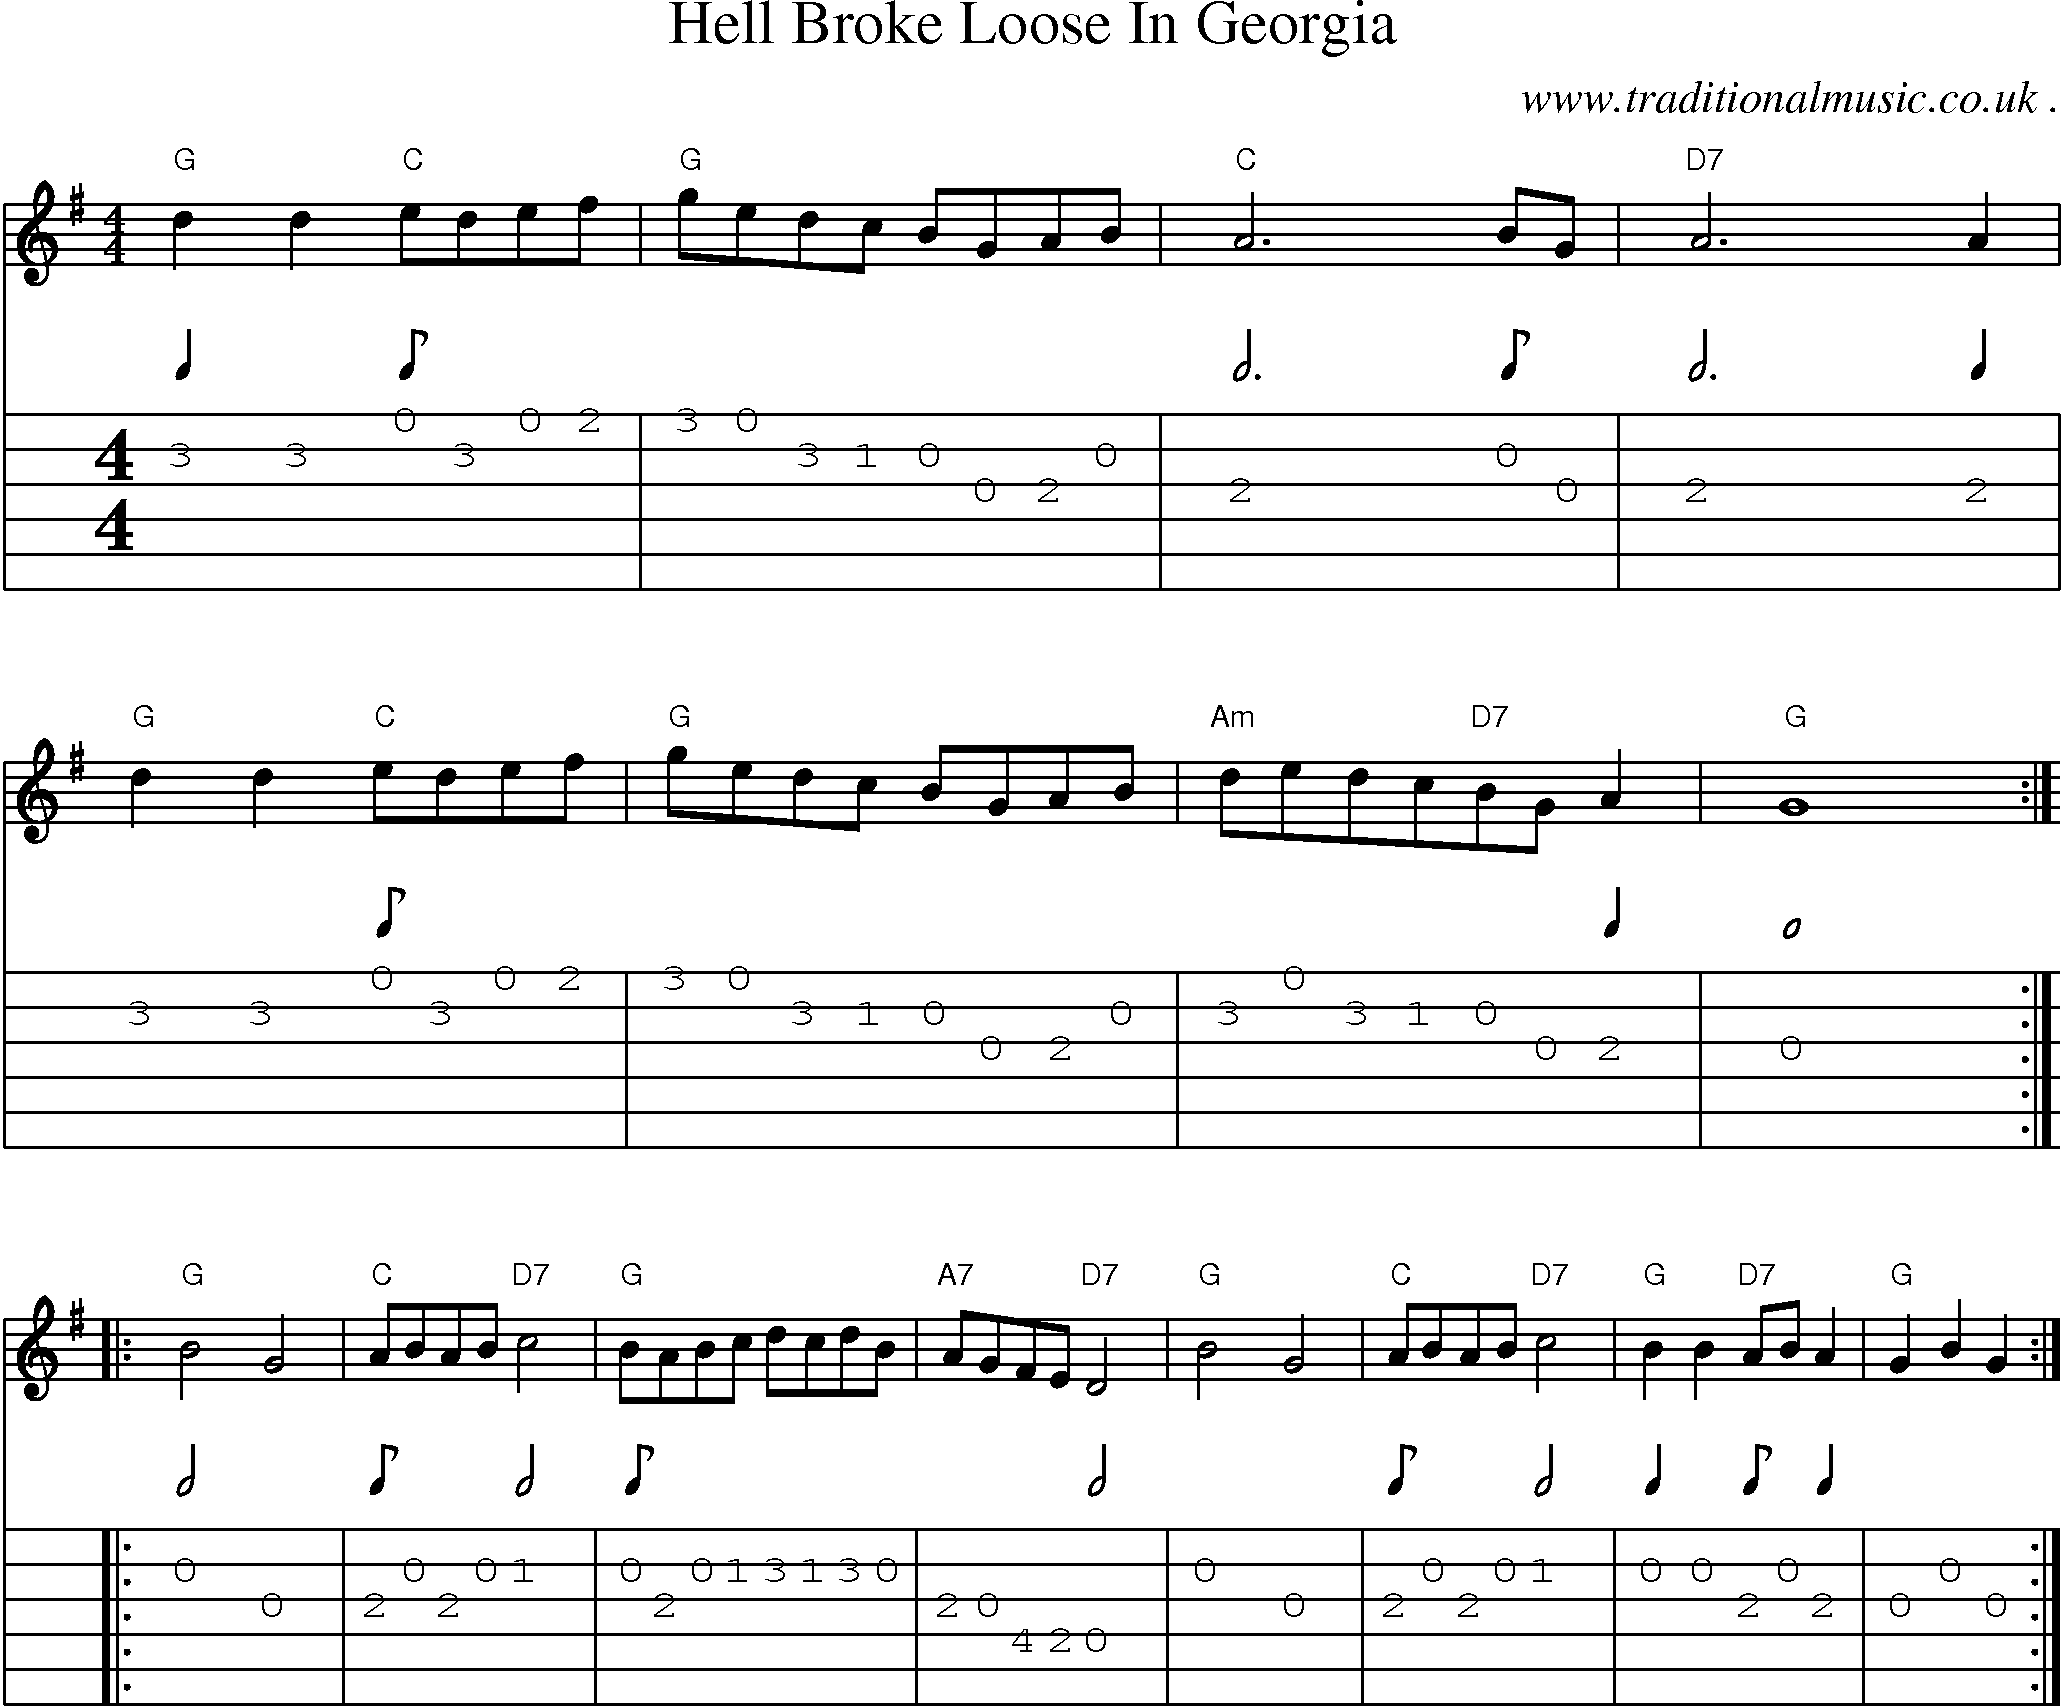 Music Score and Guitar Tabs for Hell Broke Loose In Georgia